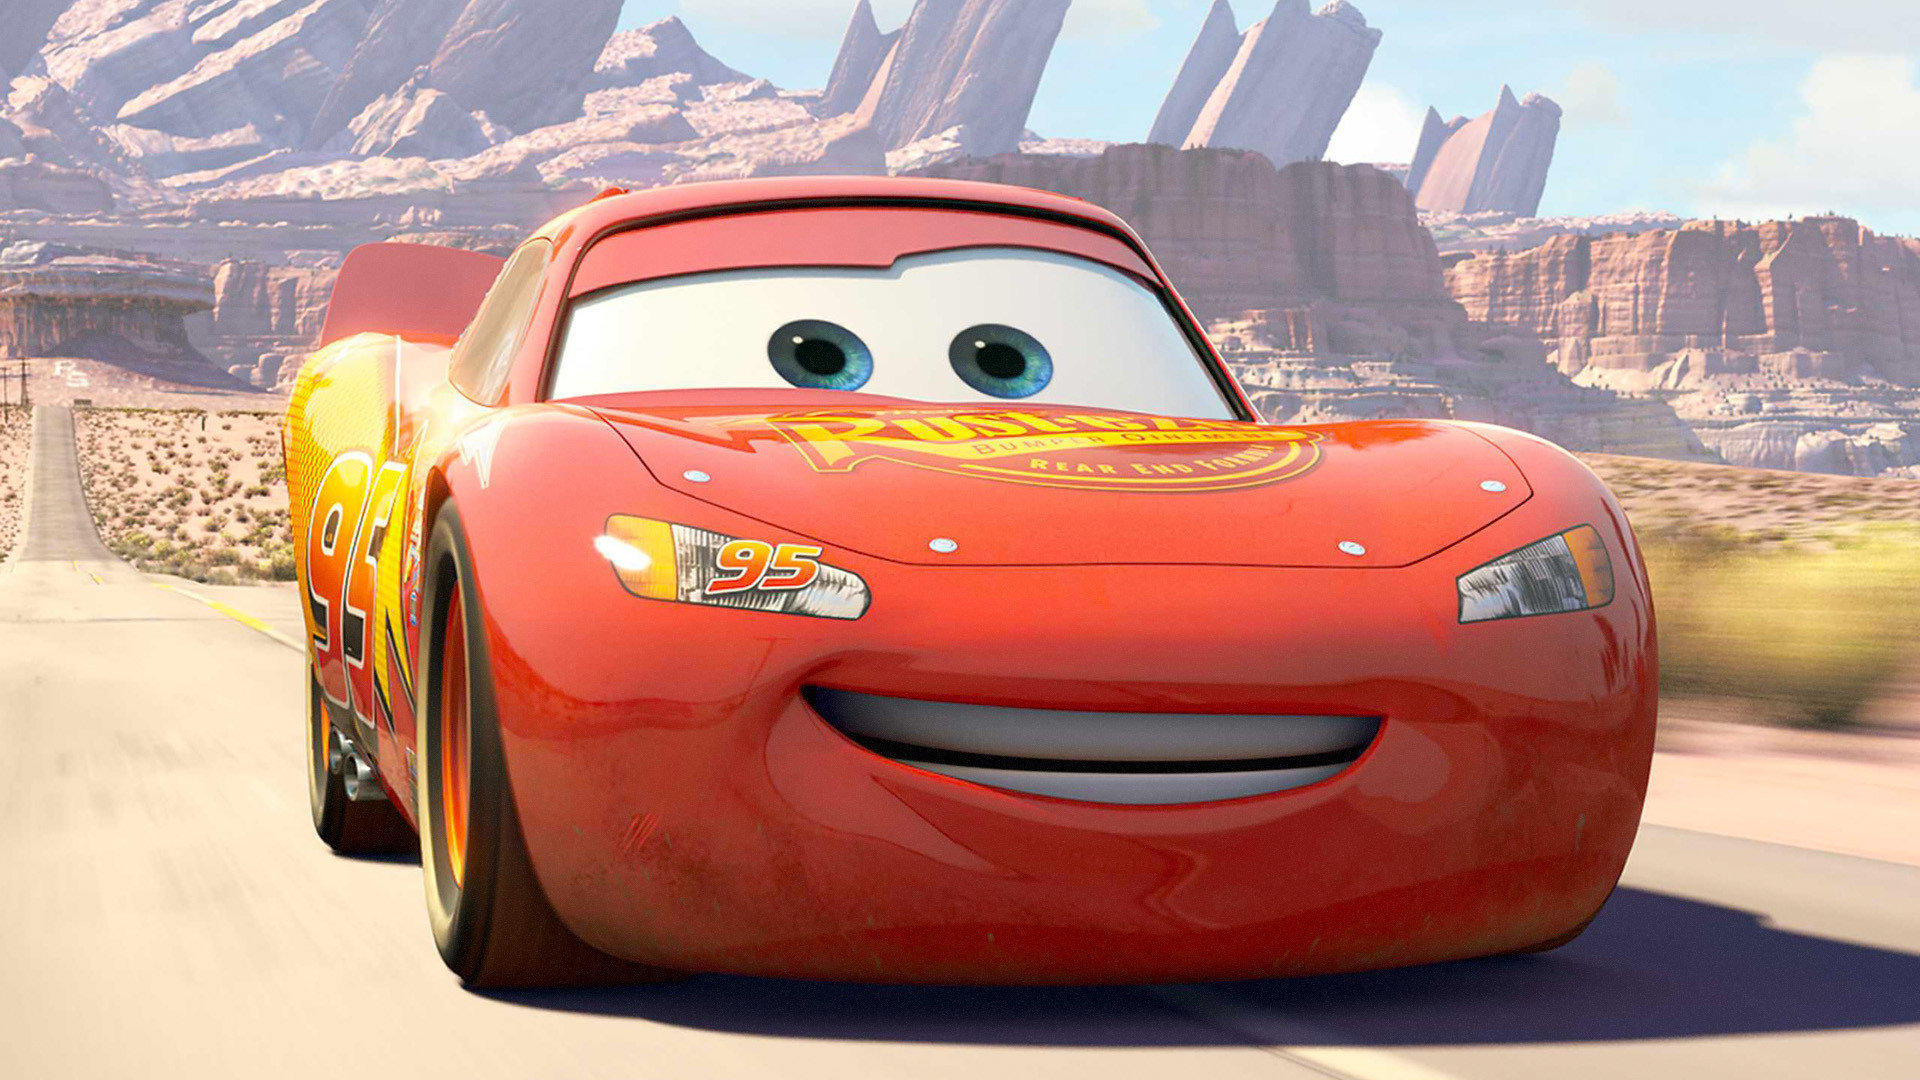 Cars (movie) wallpapers 1920x1080 Full HD (1080p) desktop backgrounds